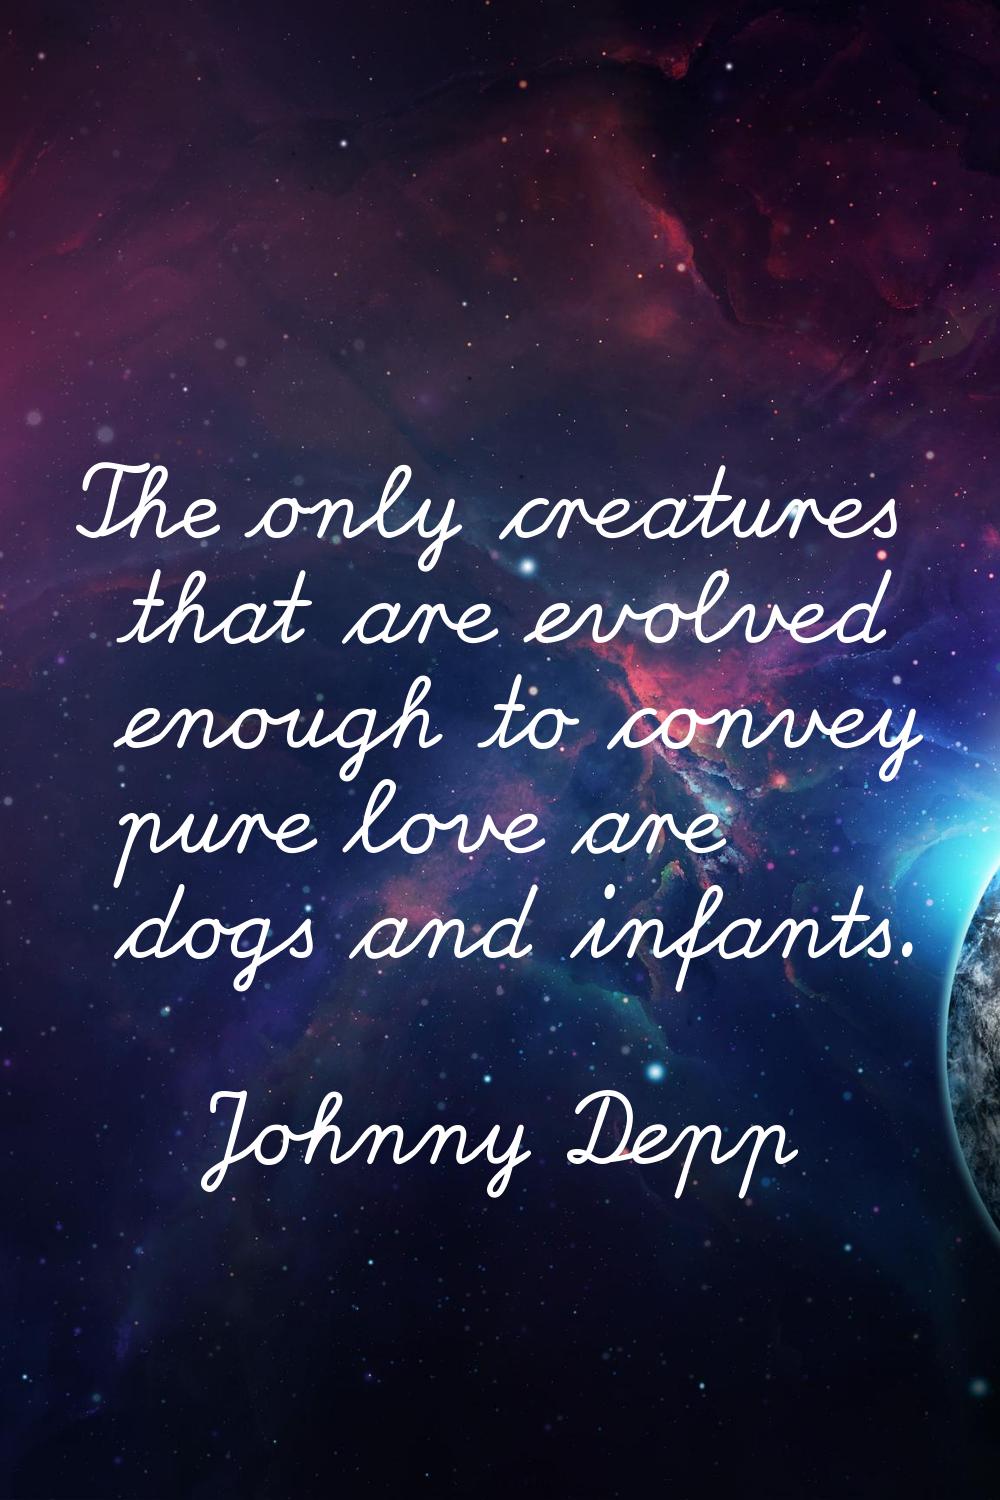 The only creatures that are evolved enough to convey pure love are dogs and infants.